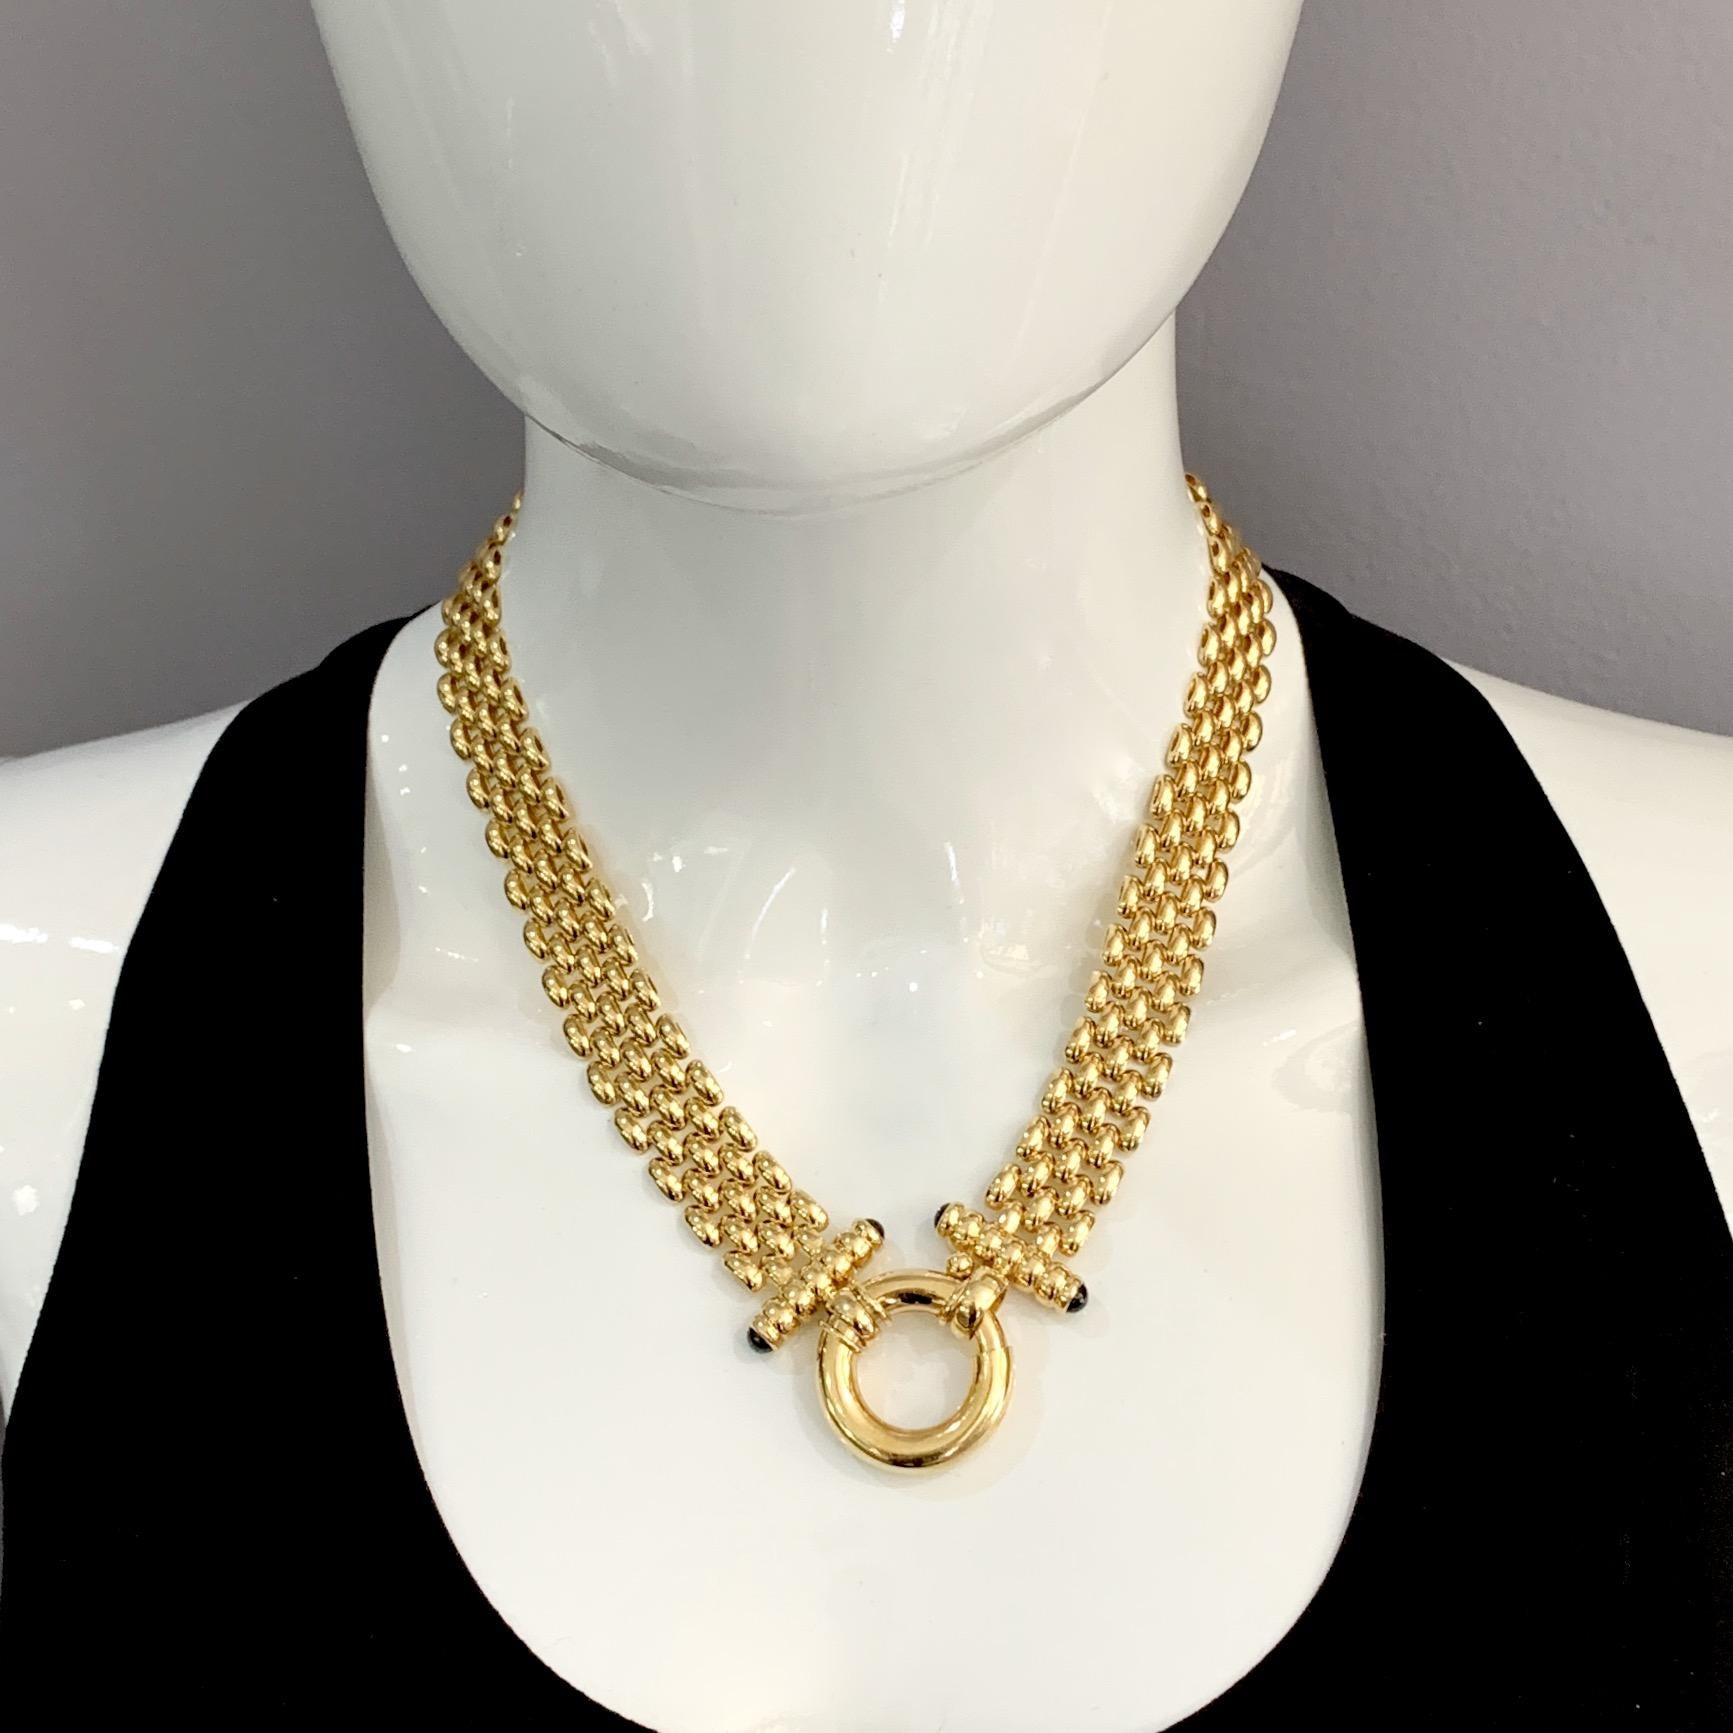 A beautifully made cornerstone piece in 14 karat yellow gold, this fabulous five-row panther chain has bar ends tipped with onyx cabochons and an oversized bolt ring closure that can be worn front or back:  as versatile as it is